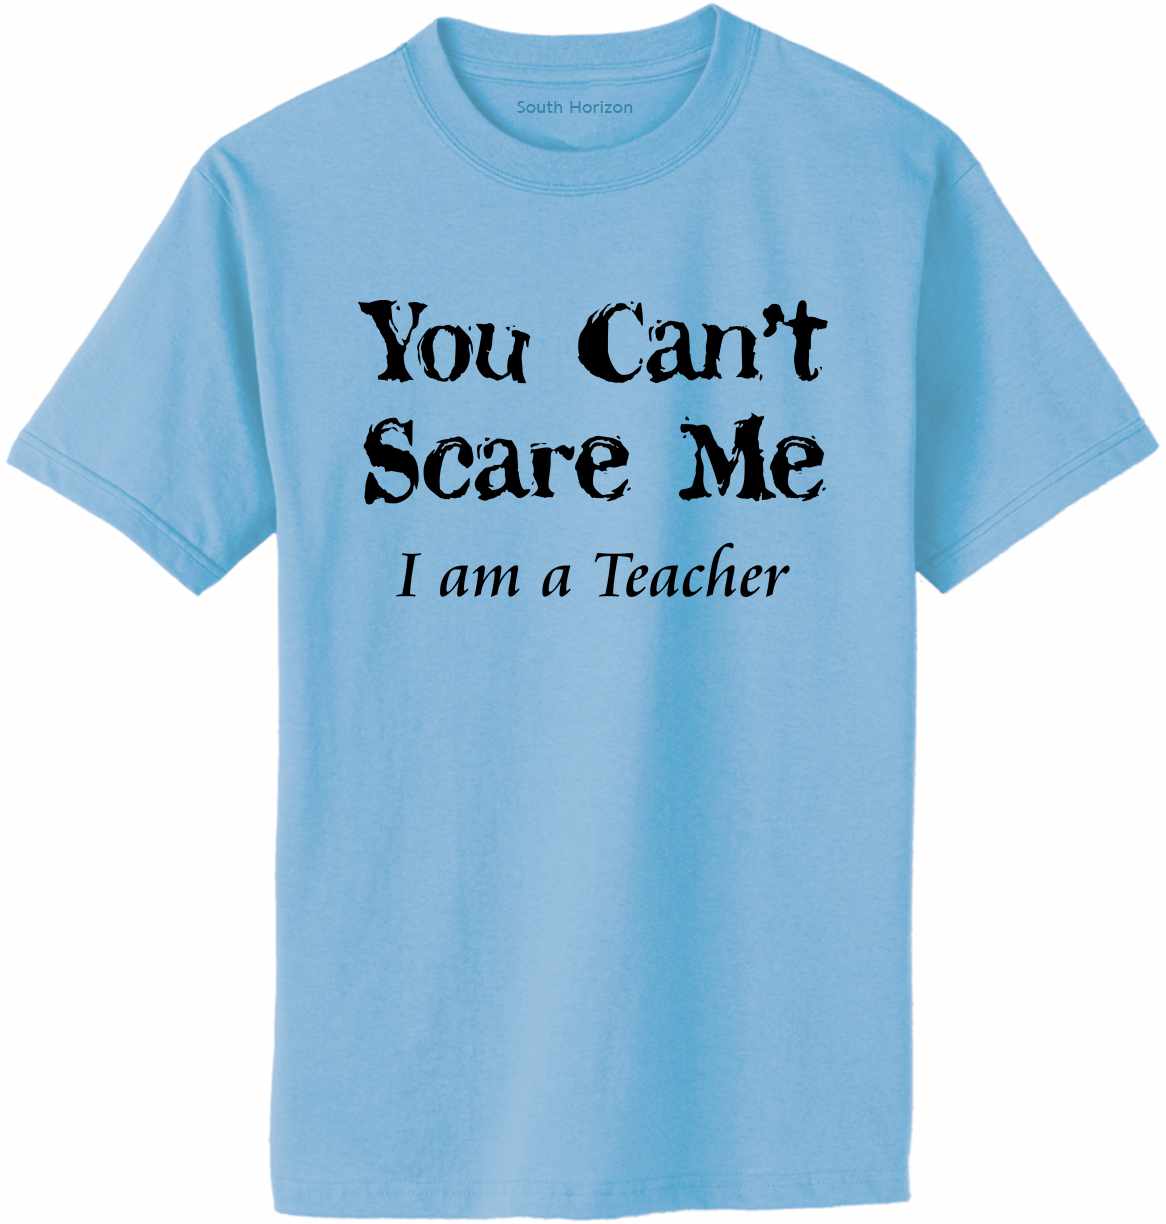 You Can't Scare Me I am a Teacher Adult T-Shirt